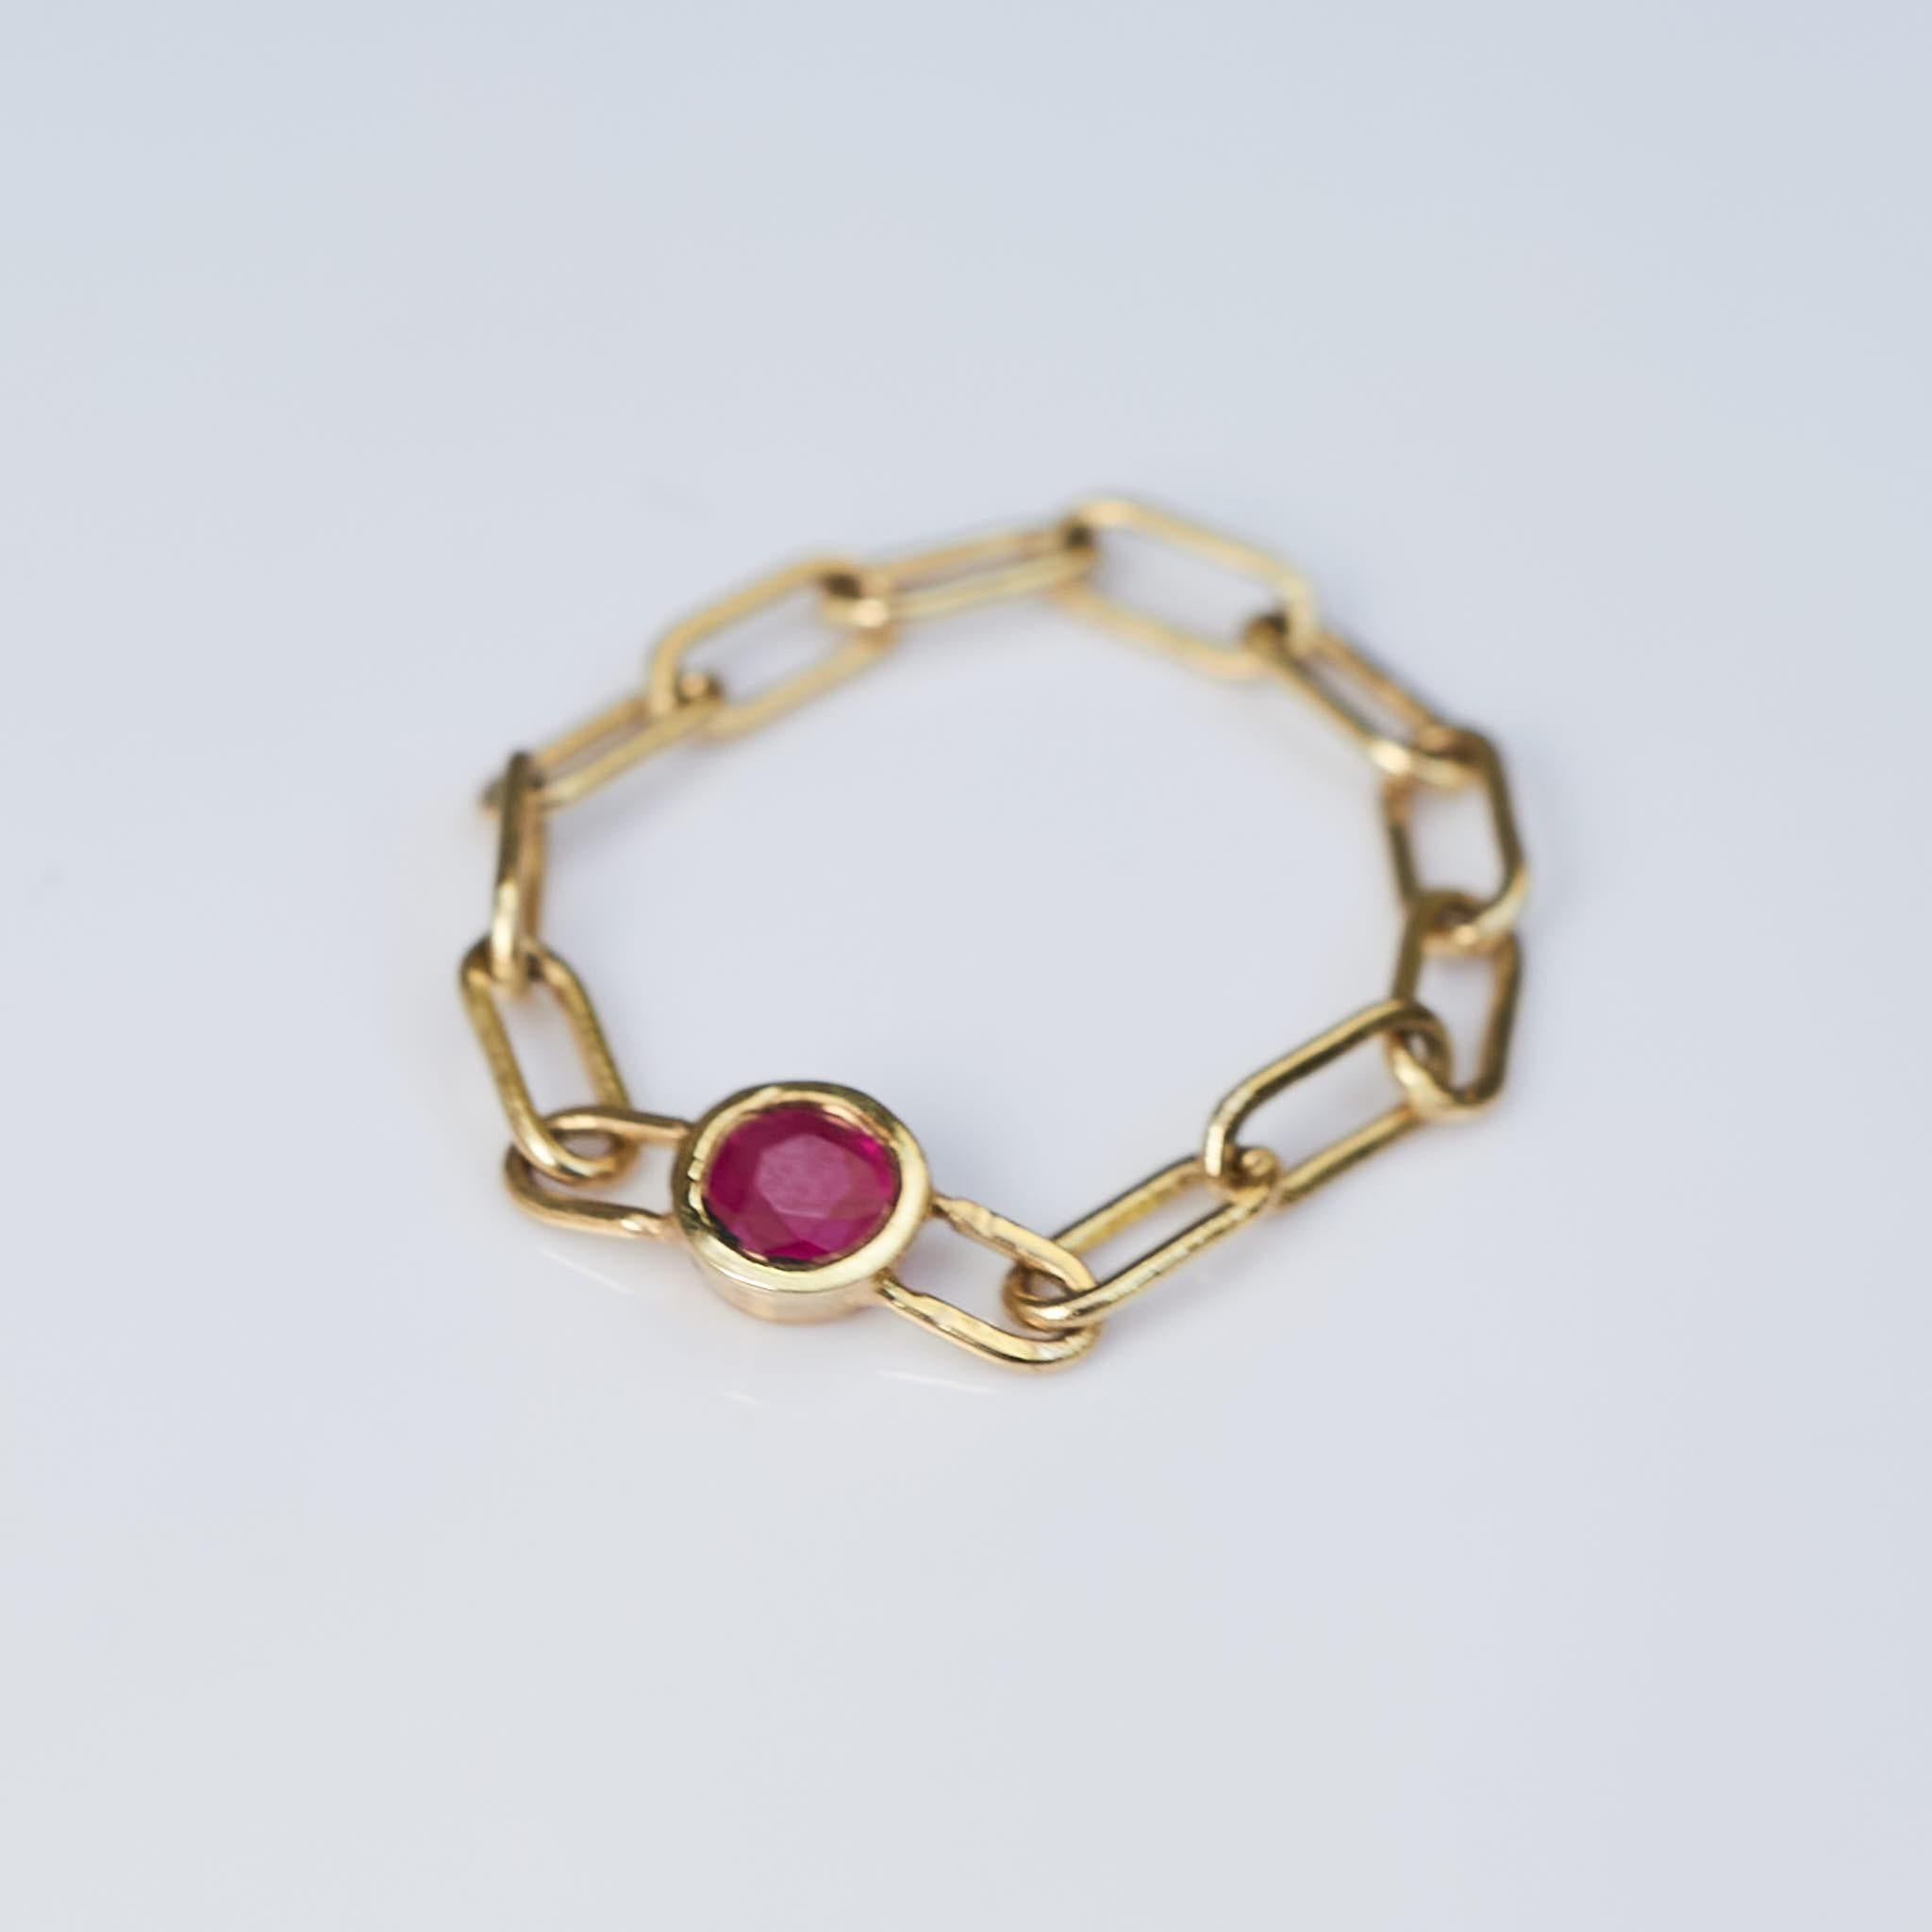 Brilliant Cut Pink Tourmaline Ring Chain Ring Gold J Dauphin For Sale